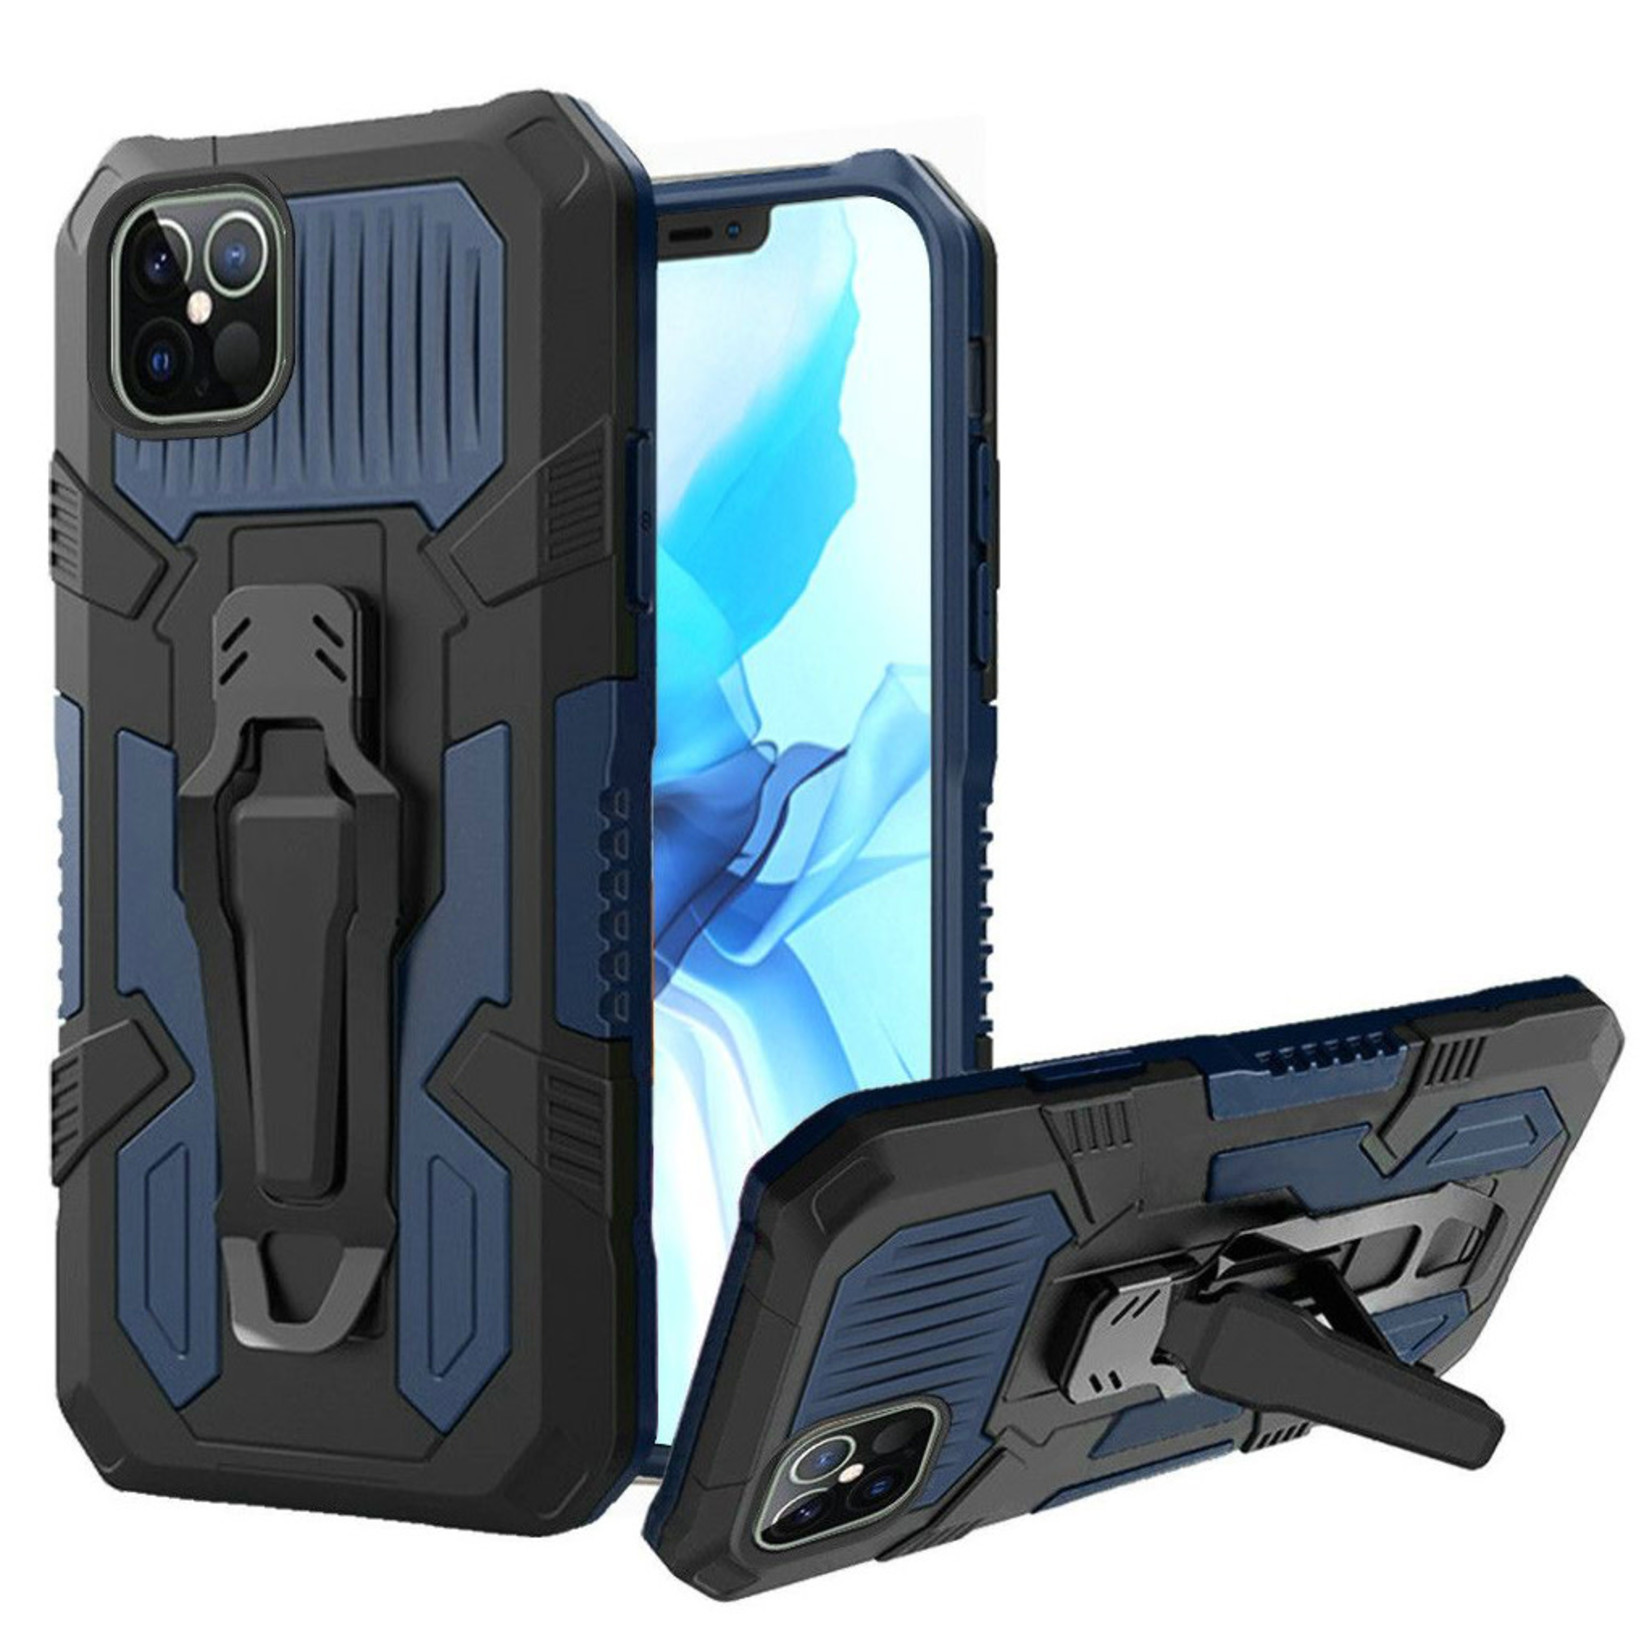 Tactical Armor Shockproof Case with Kickstand for Celero 5G